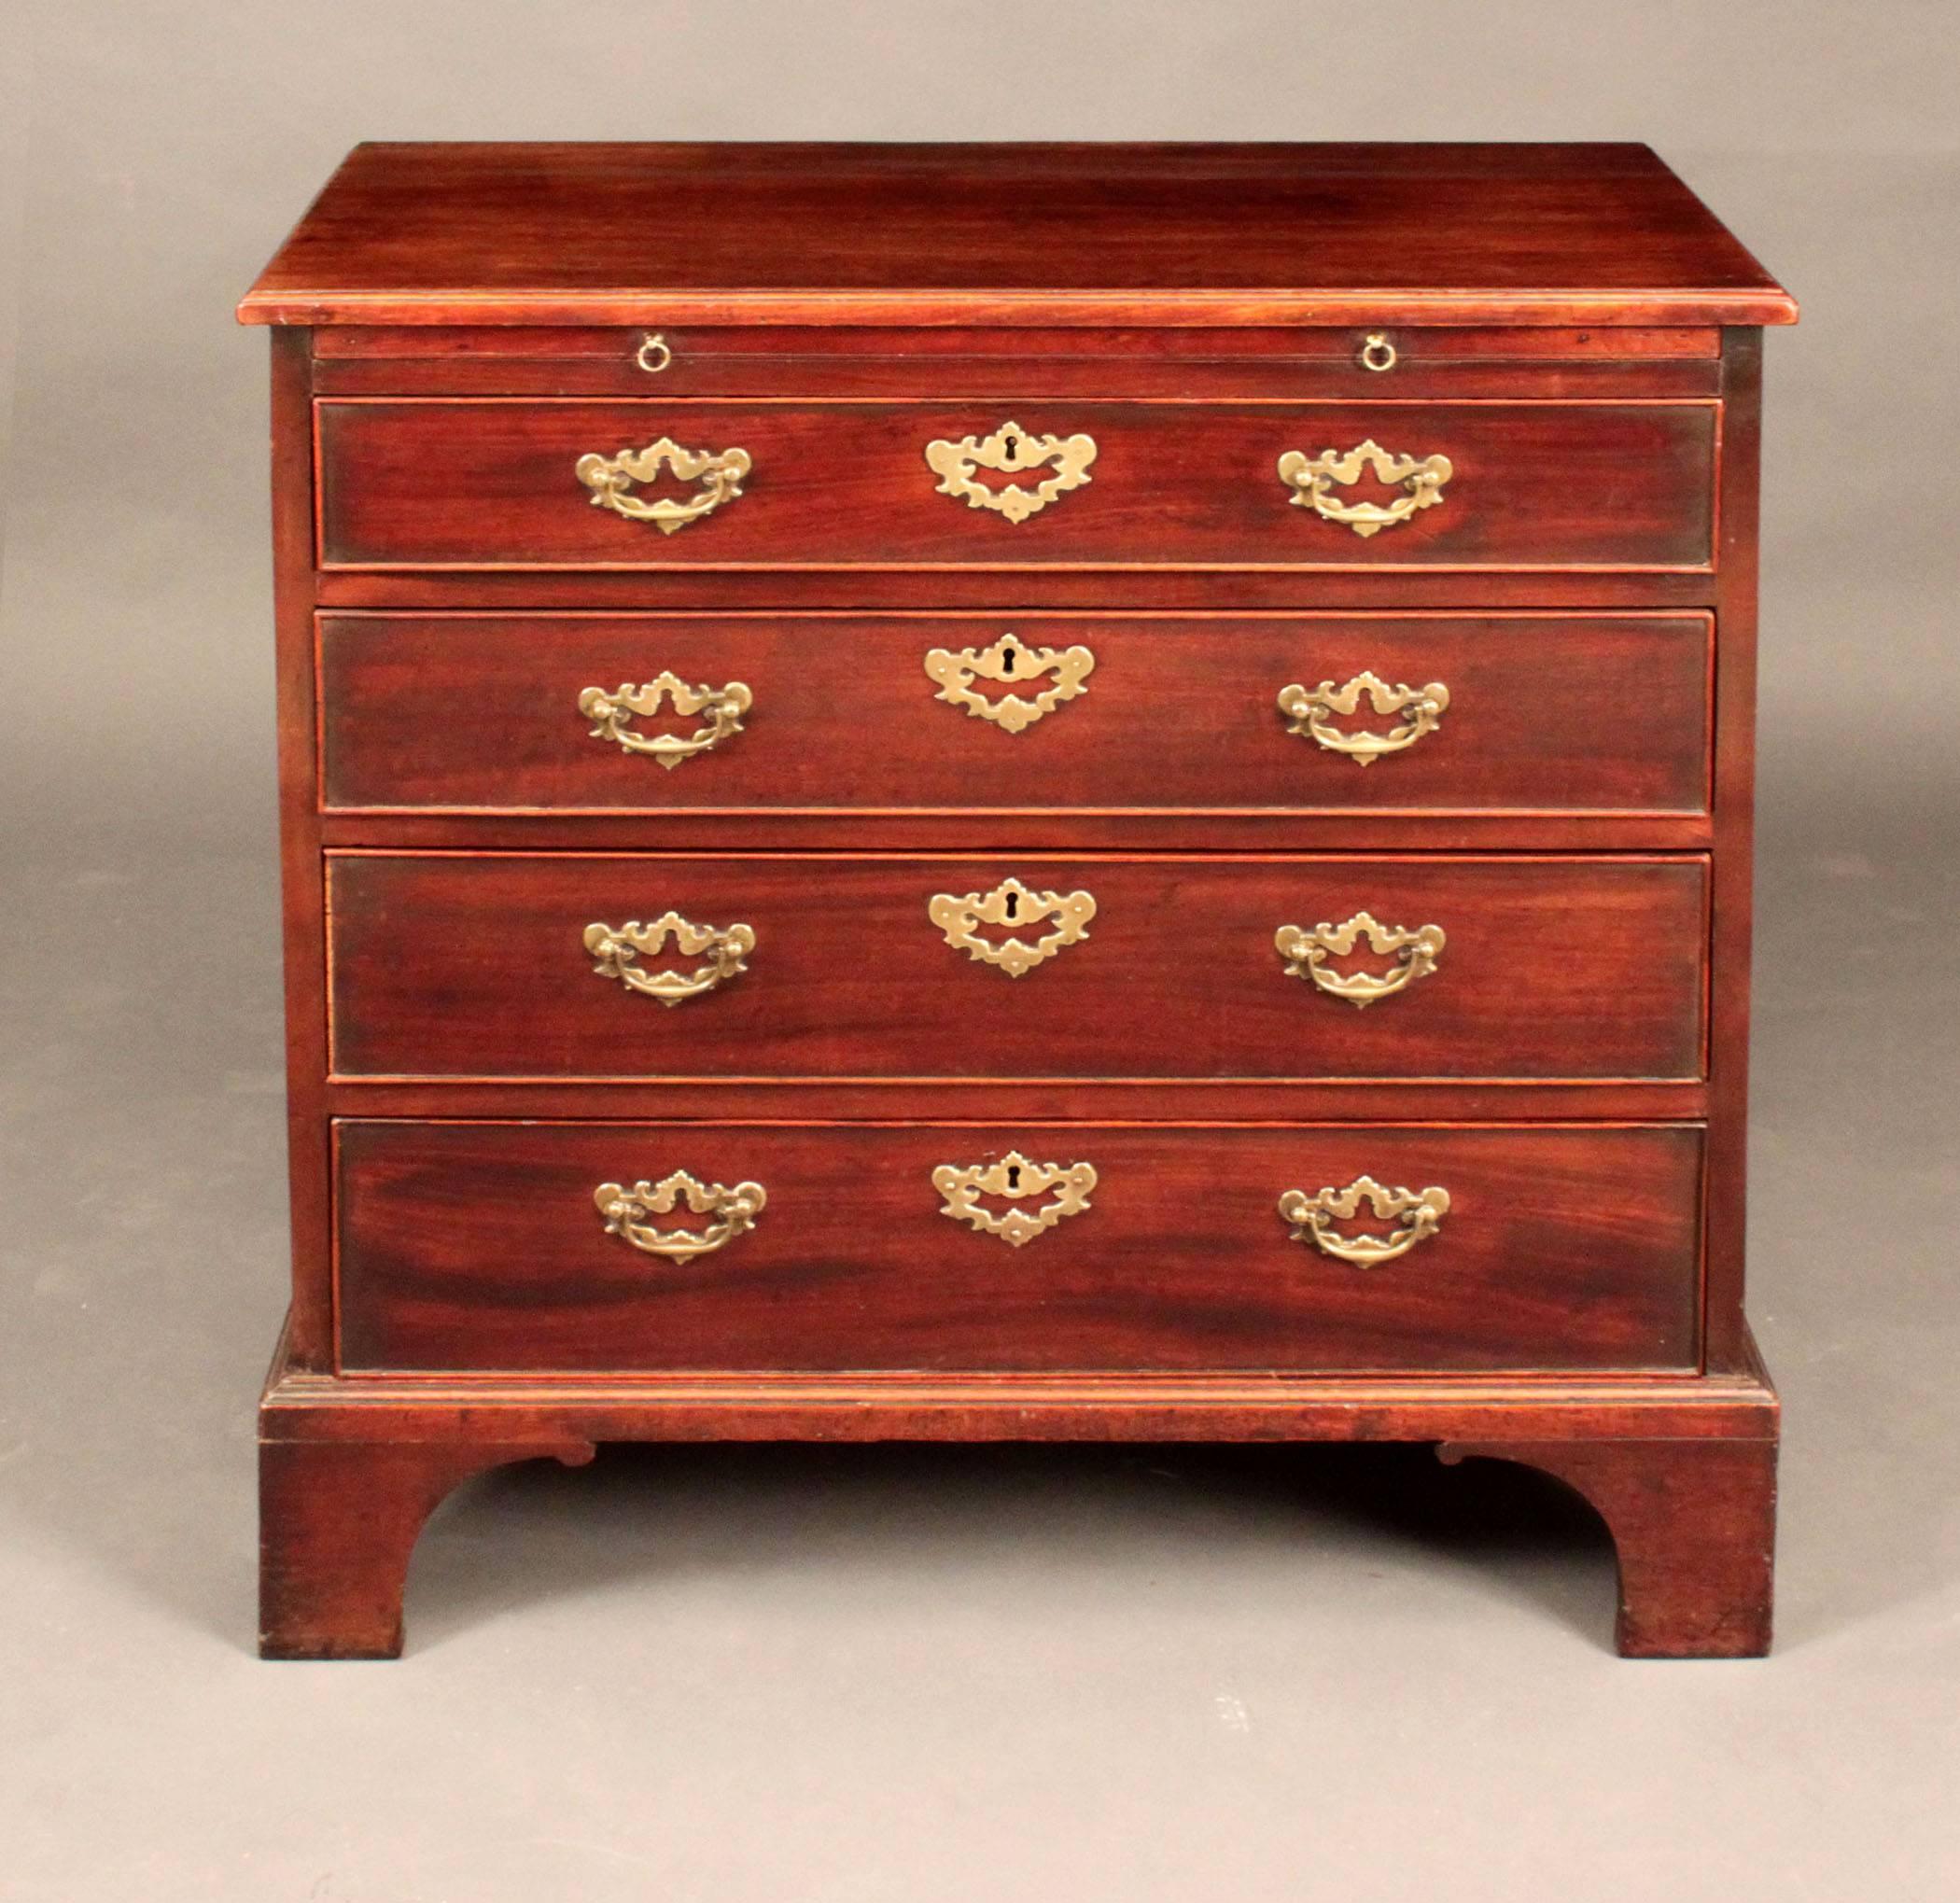 George III small mahogany chest of drawers with original plate handles and brushing slide, the drawers oak lined; good color and patina.